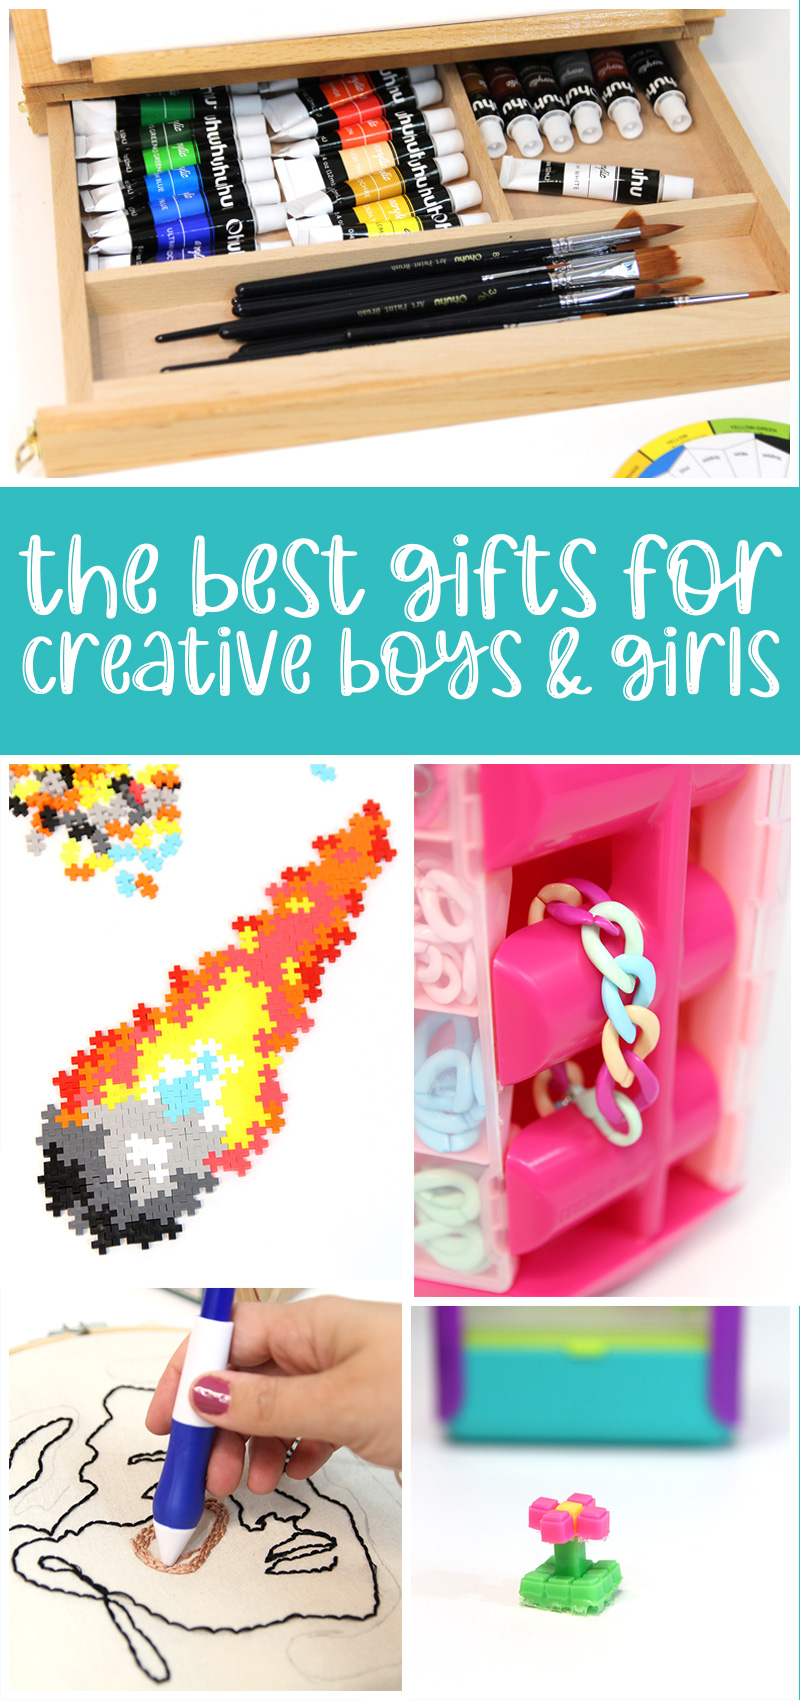 Get Creative With The Best Crafts For Girls 8-12